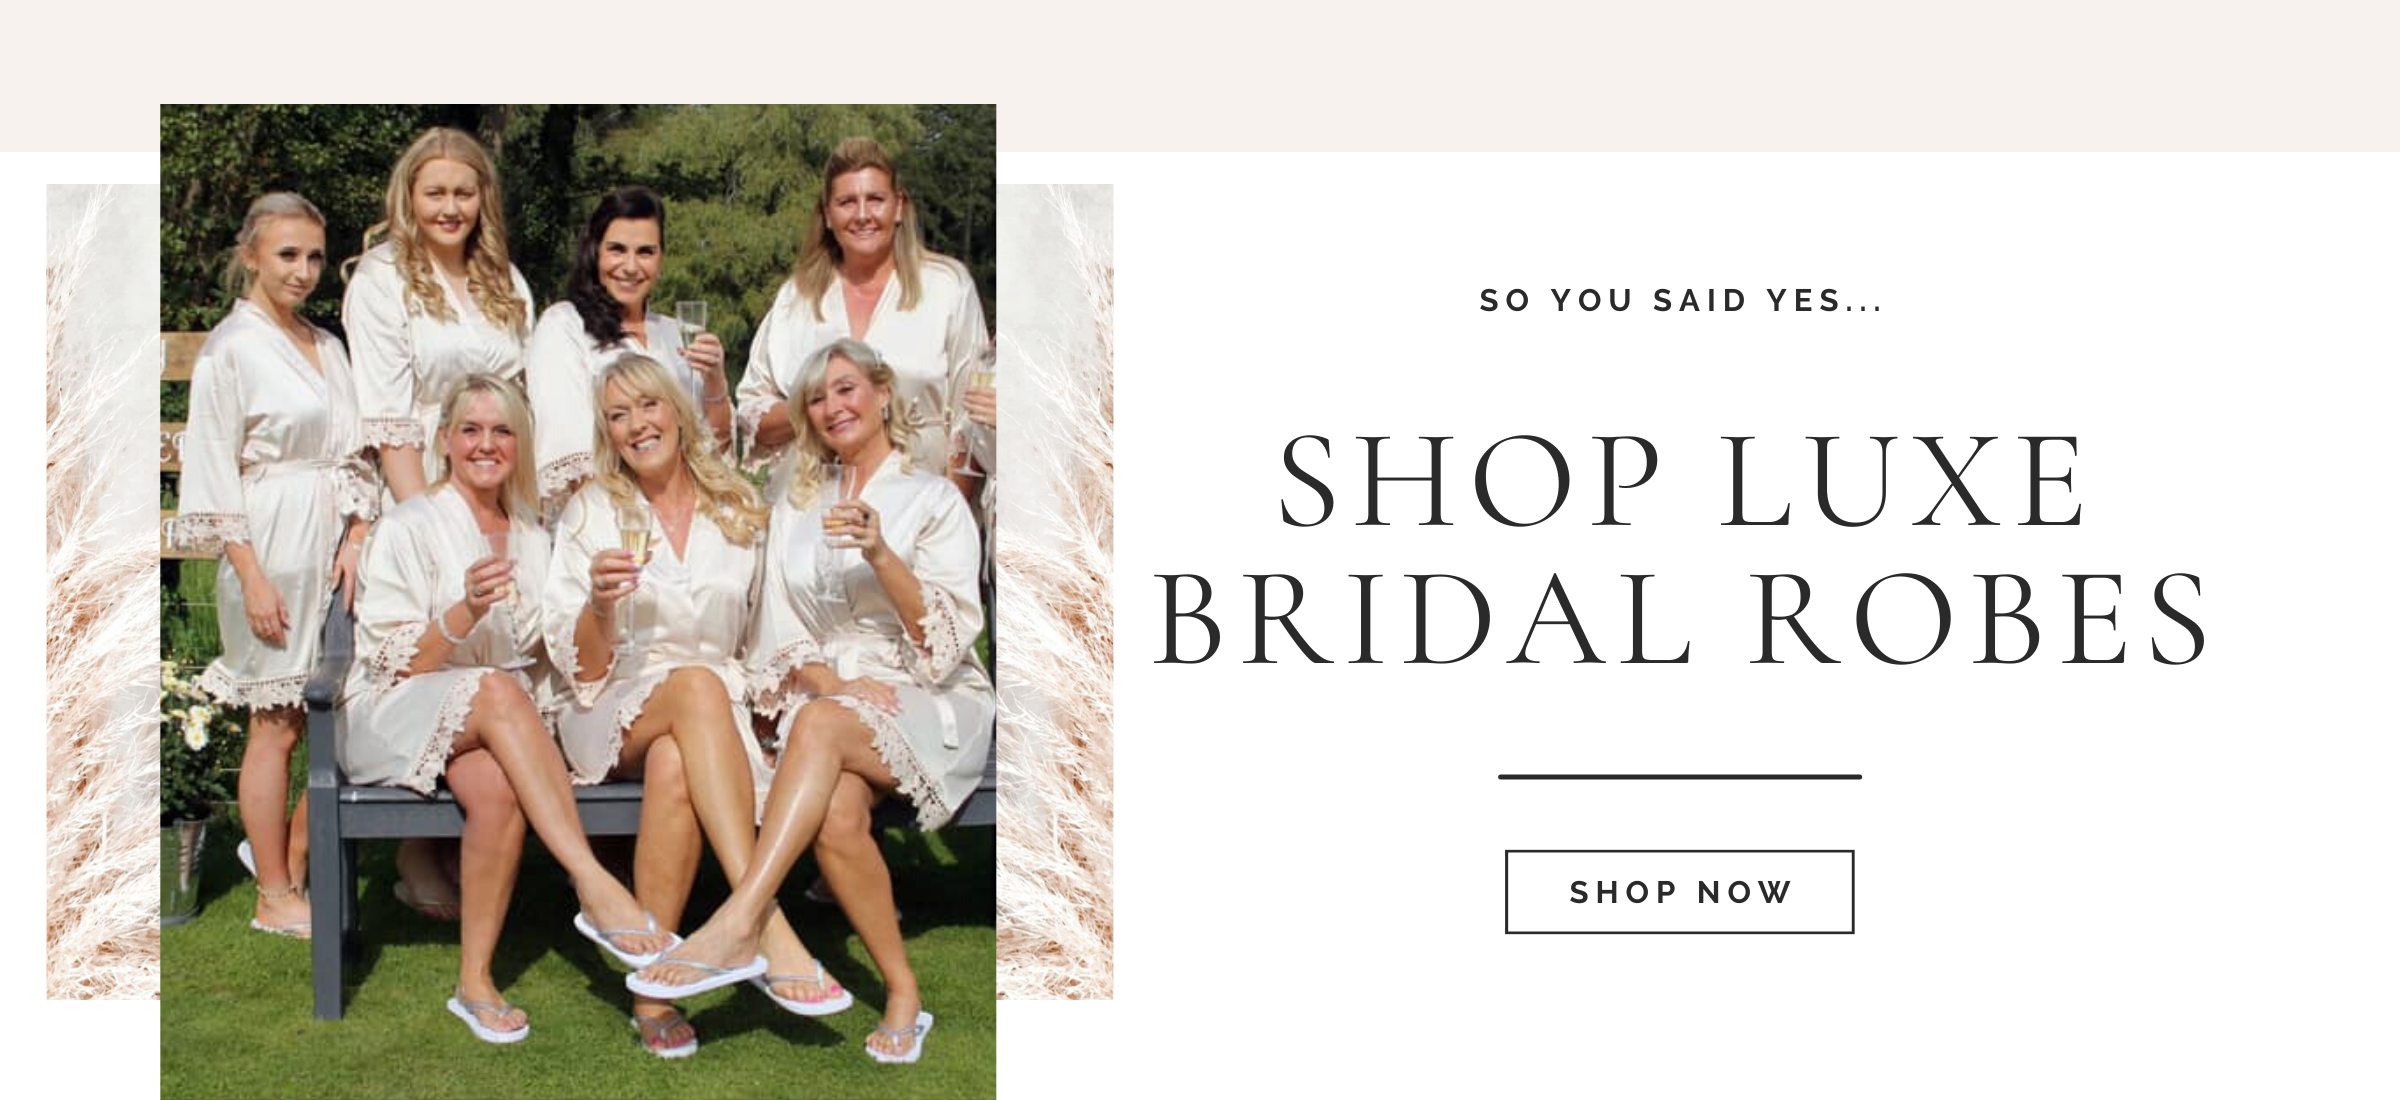 Bridal robes and Hen party accessories – Lovefox